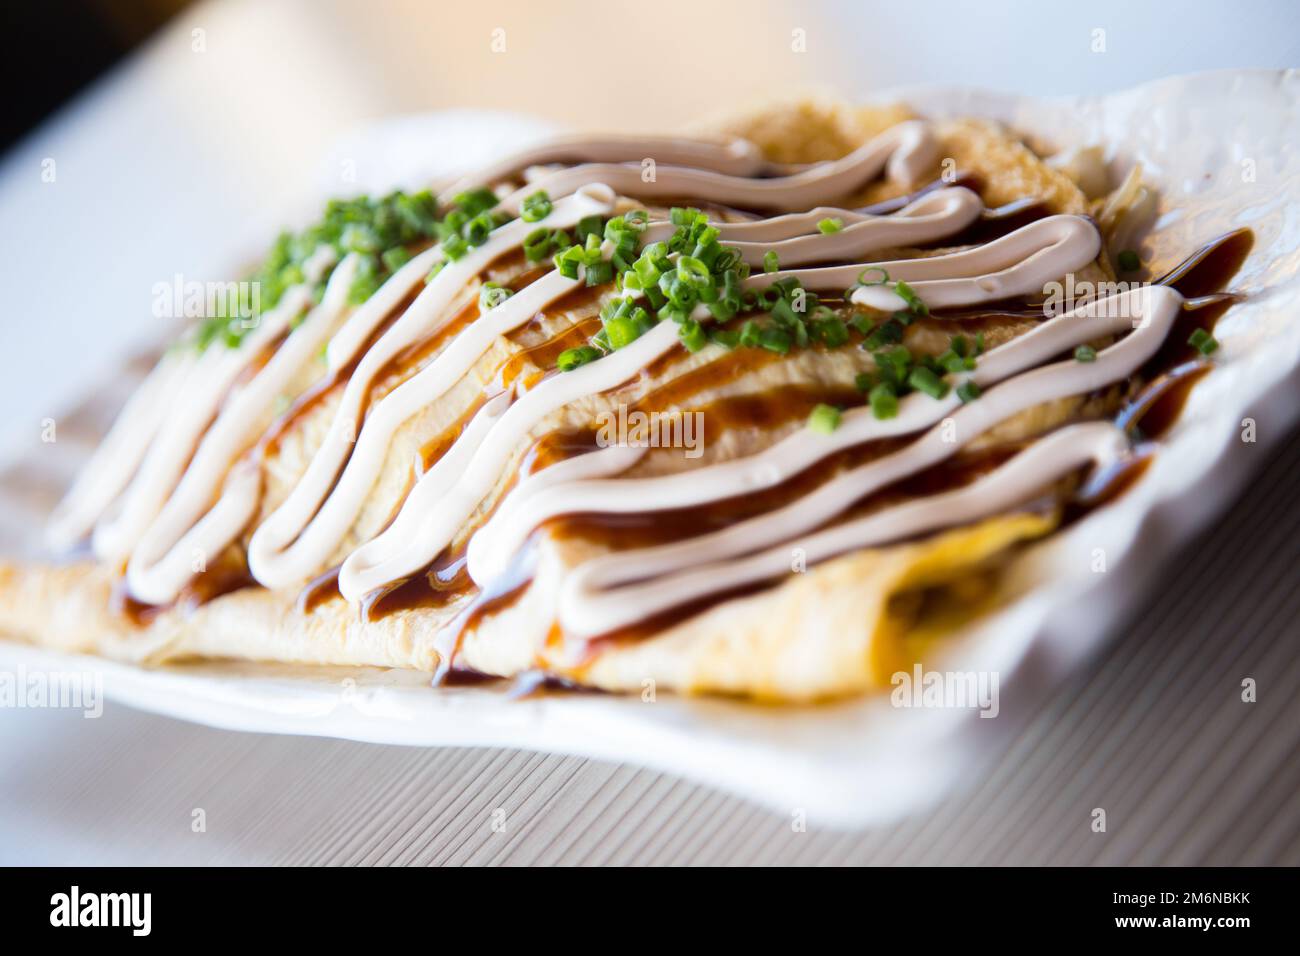 Japanese rice omelette stuffed with vegetables, meat and covered with various sauces. Stock Photo